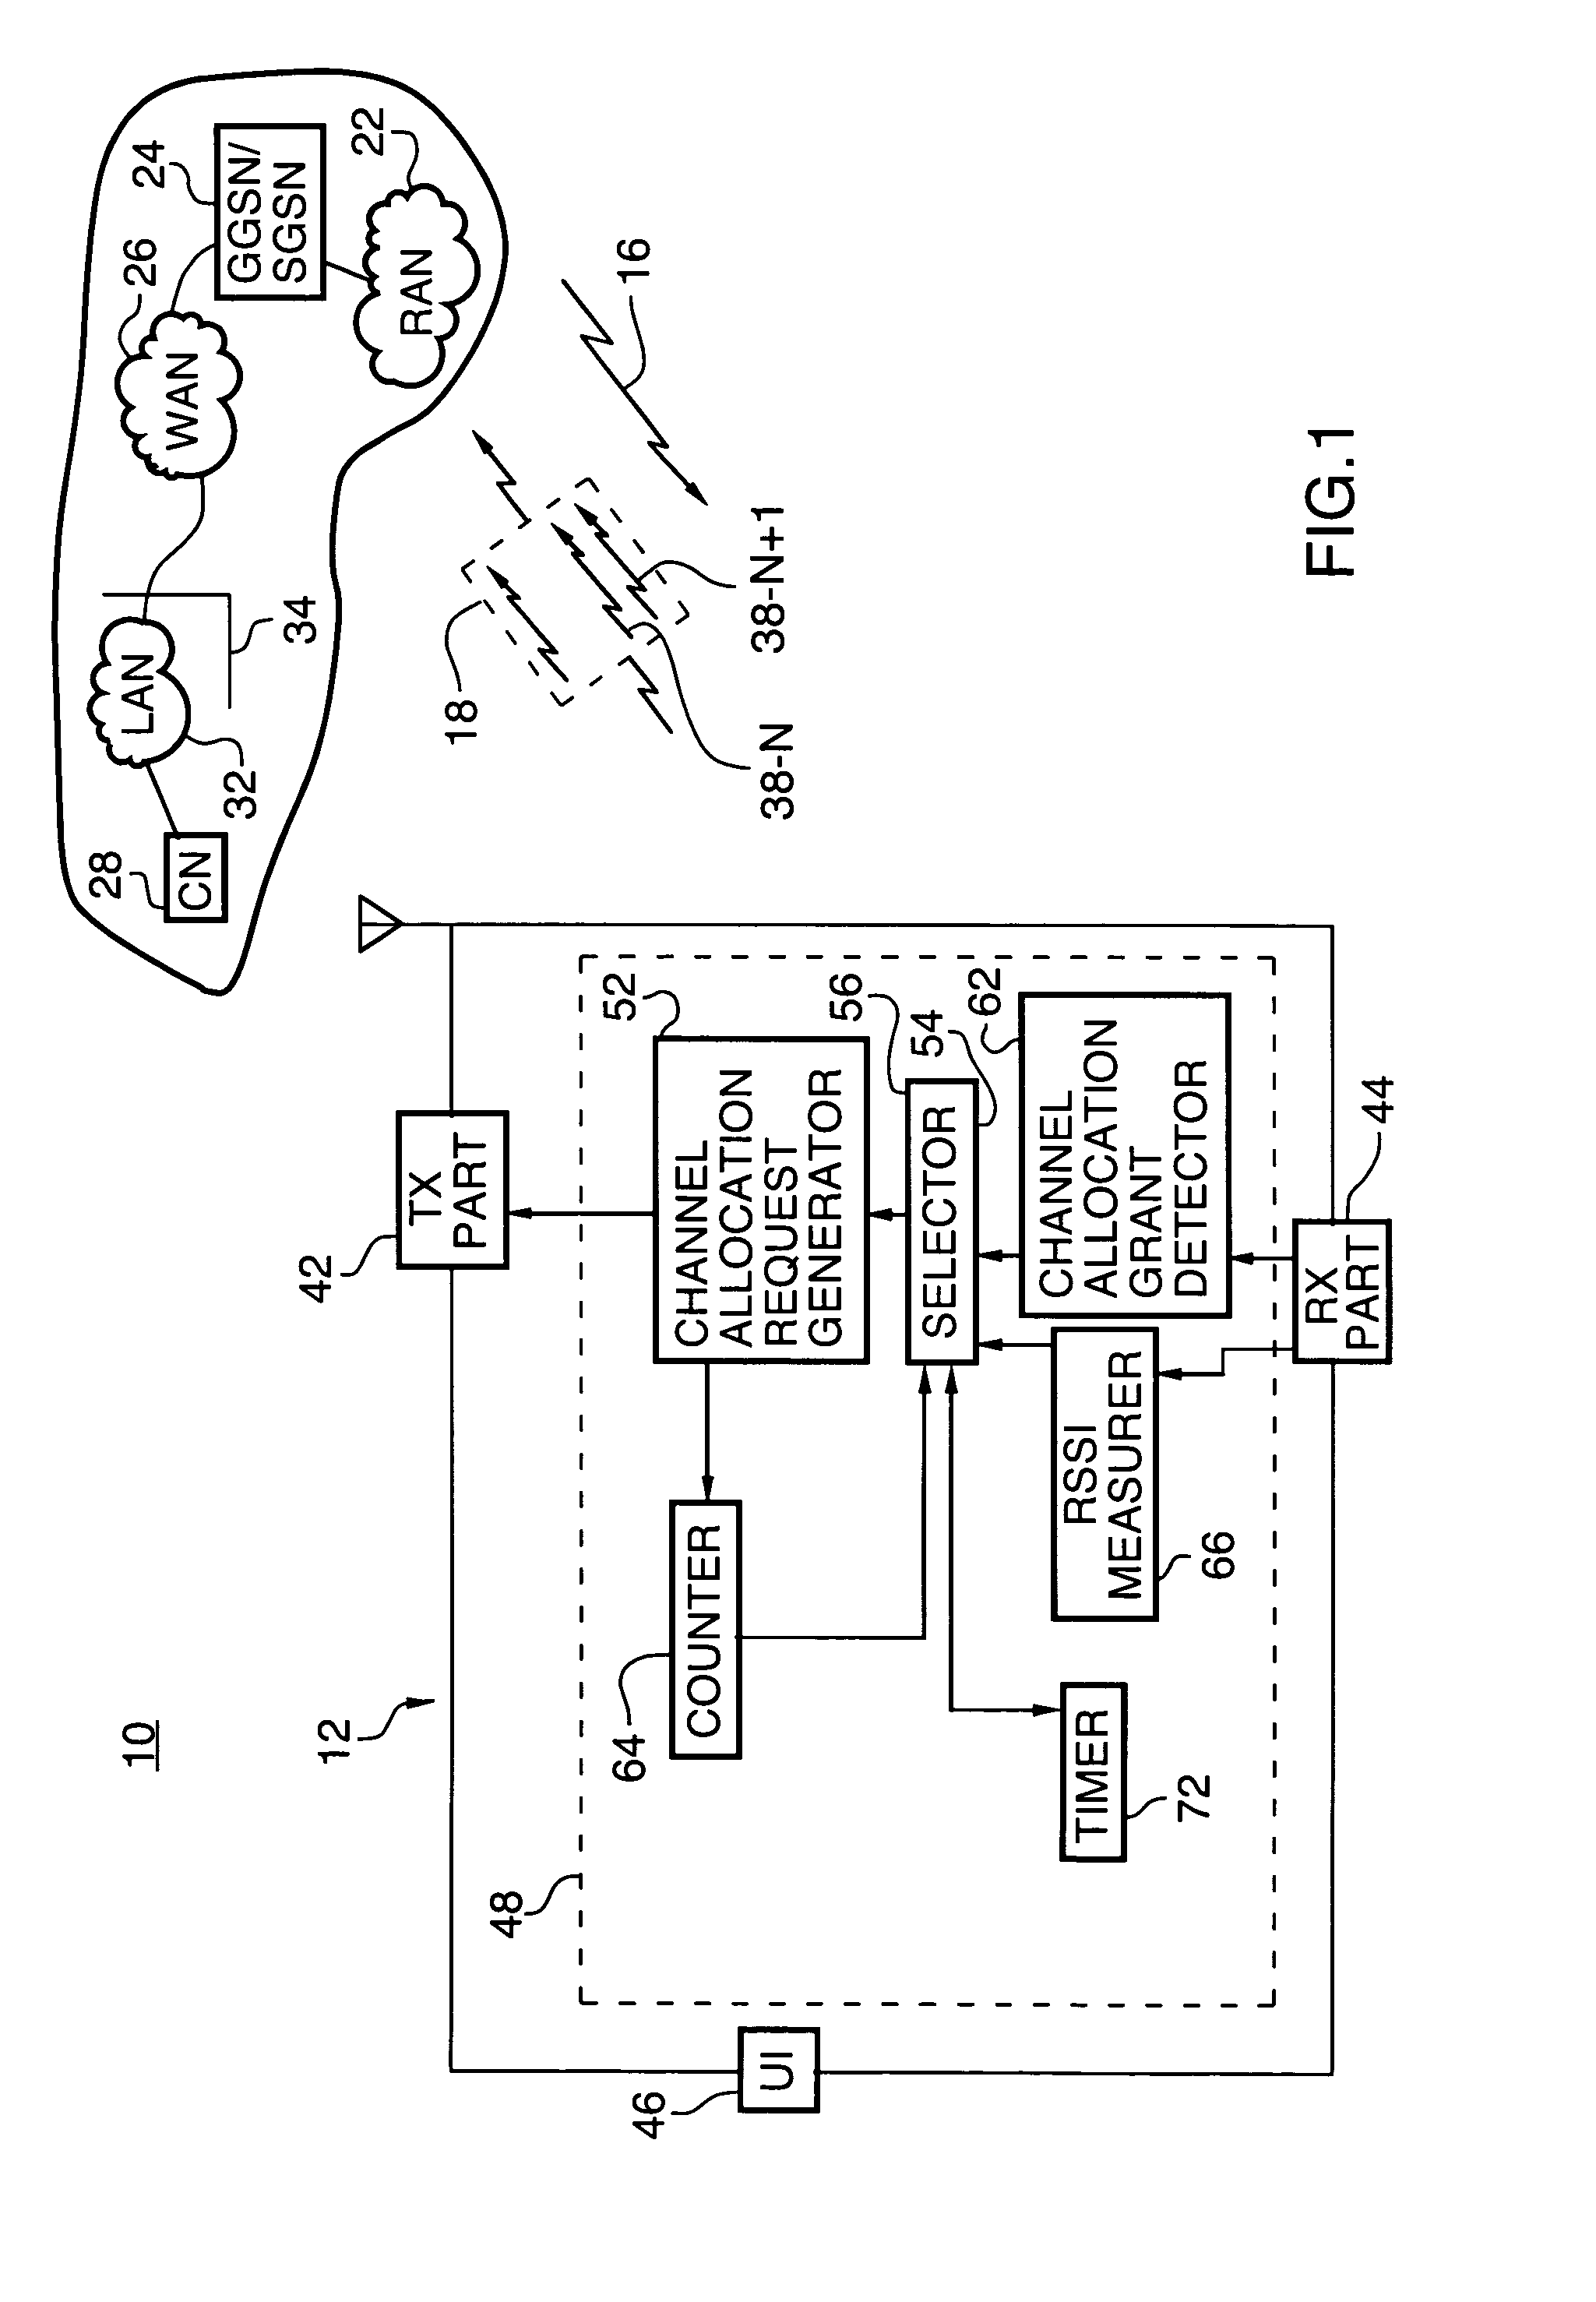 Apparatus, and associated method, for facilitating initiation of channel allocation to communicate data in a radio communication system